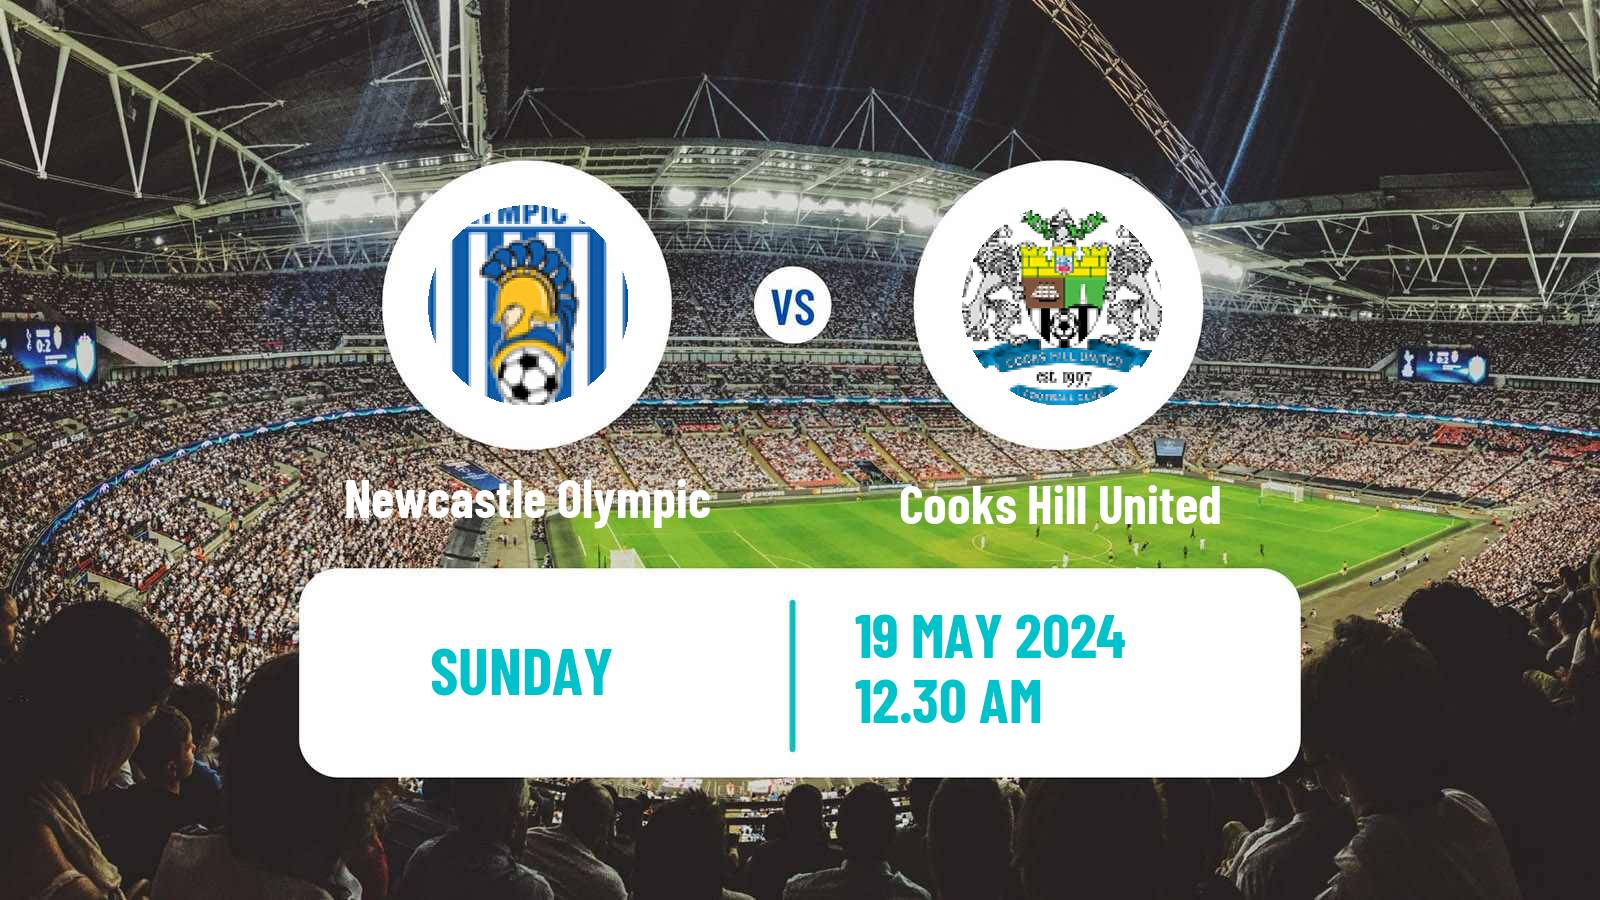 Soccer Australian NPL Northern NSW Newcastle Olympic - Cooks Hill United